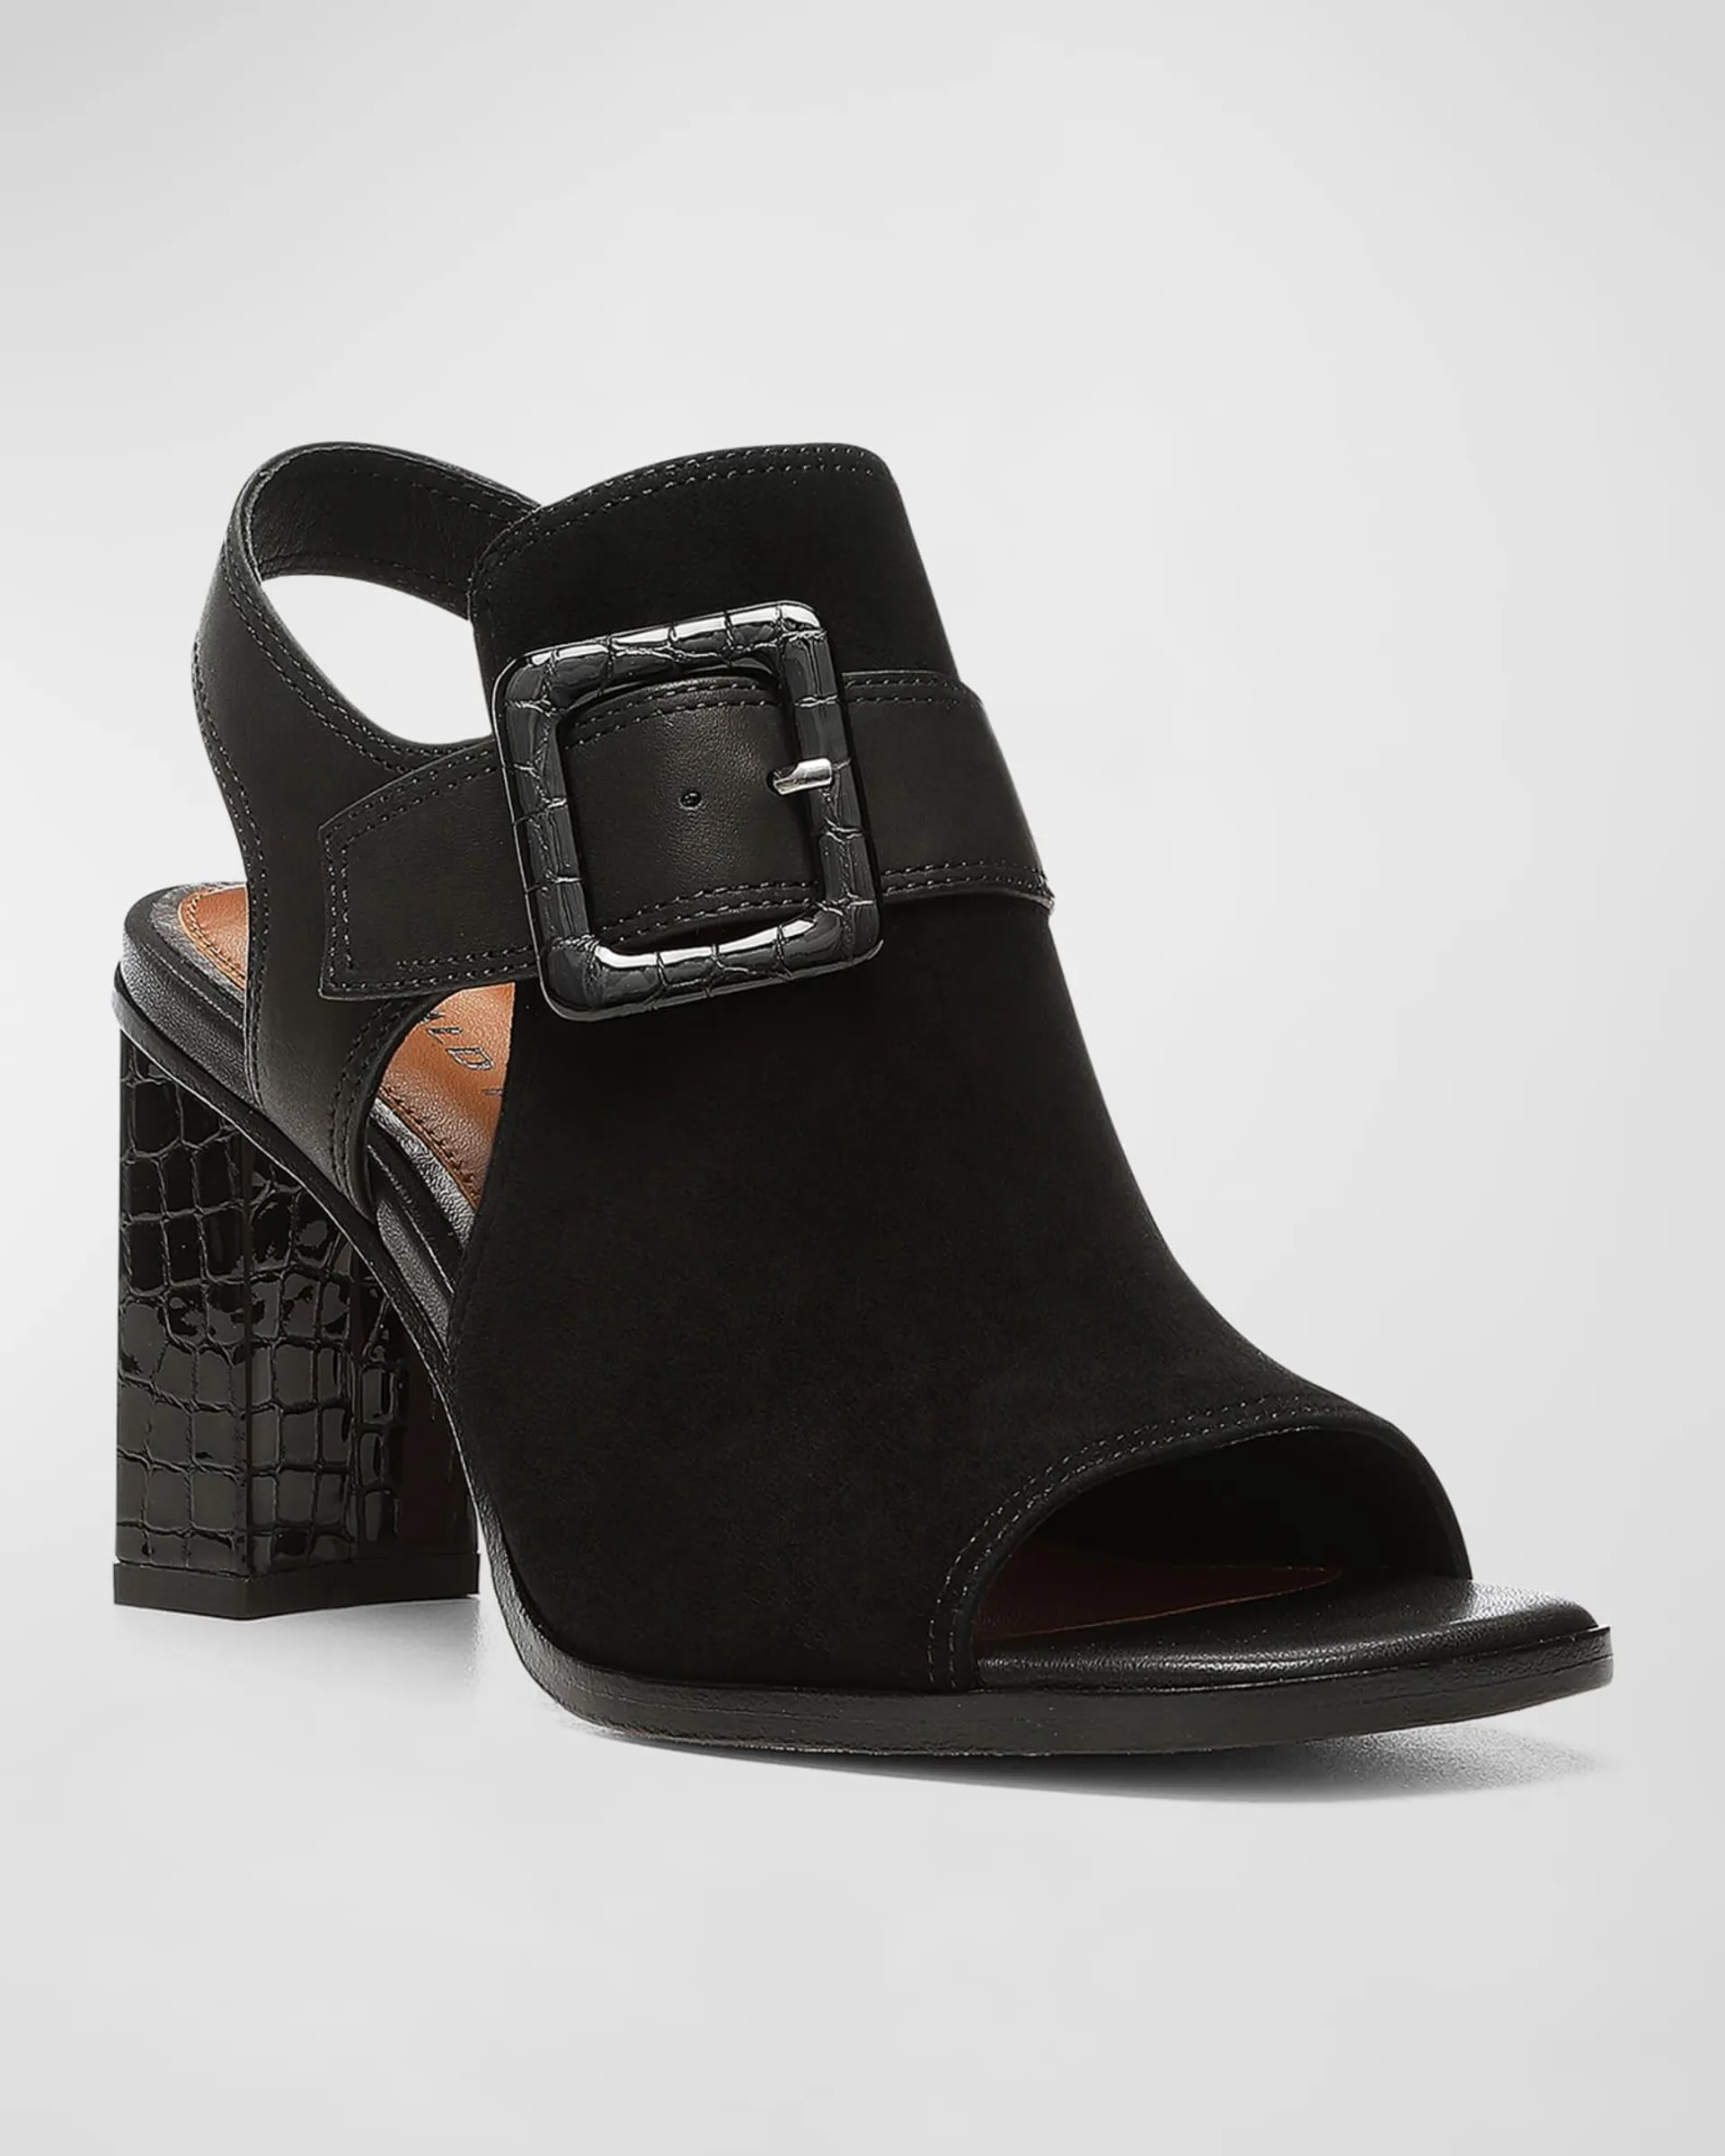 Irwin Mixed Leather Buckle Sandals